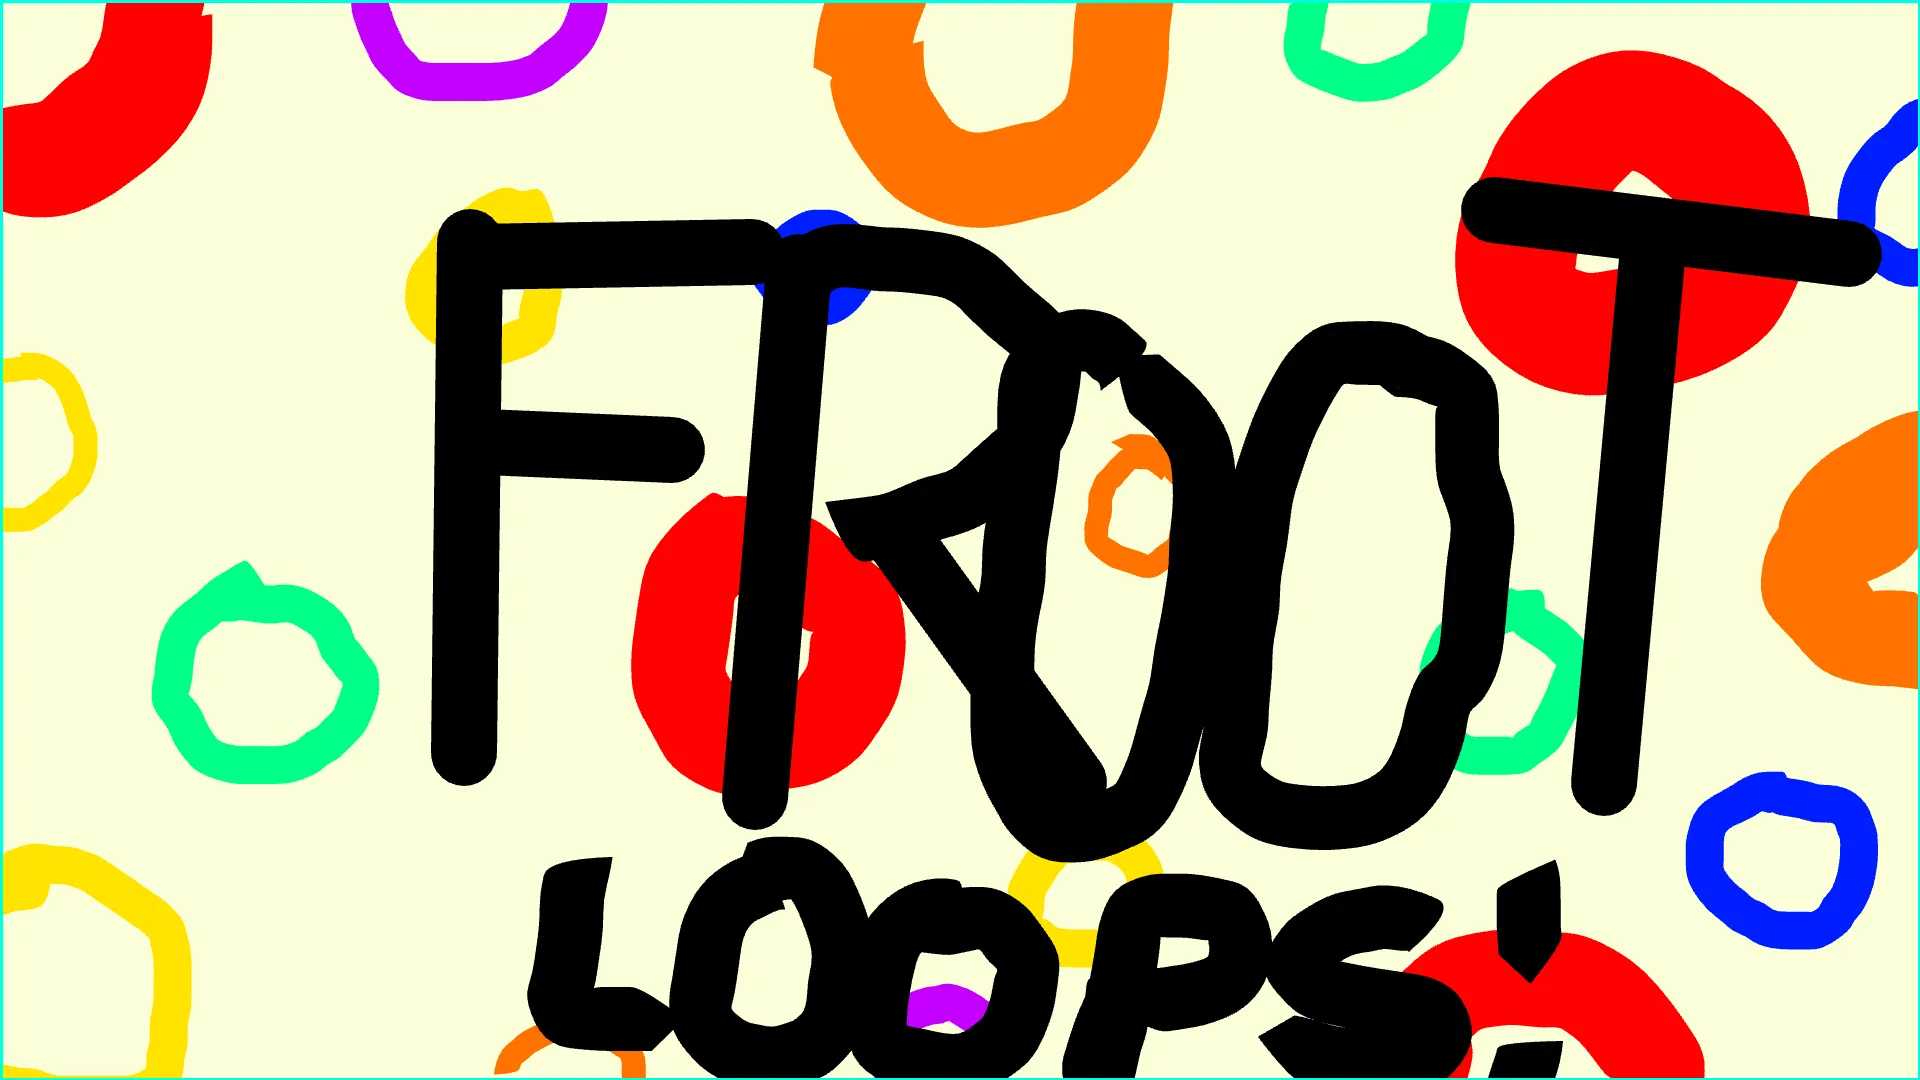 Froot lopes